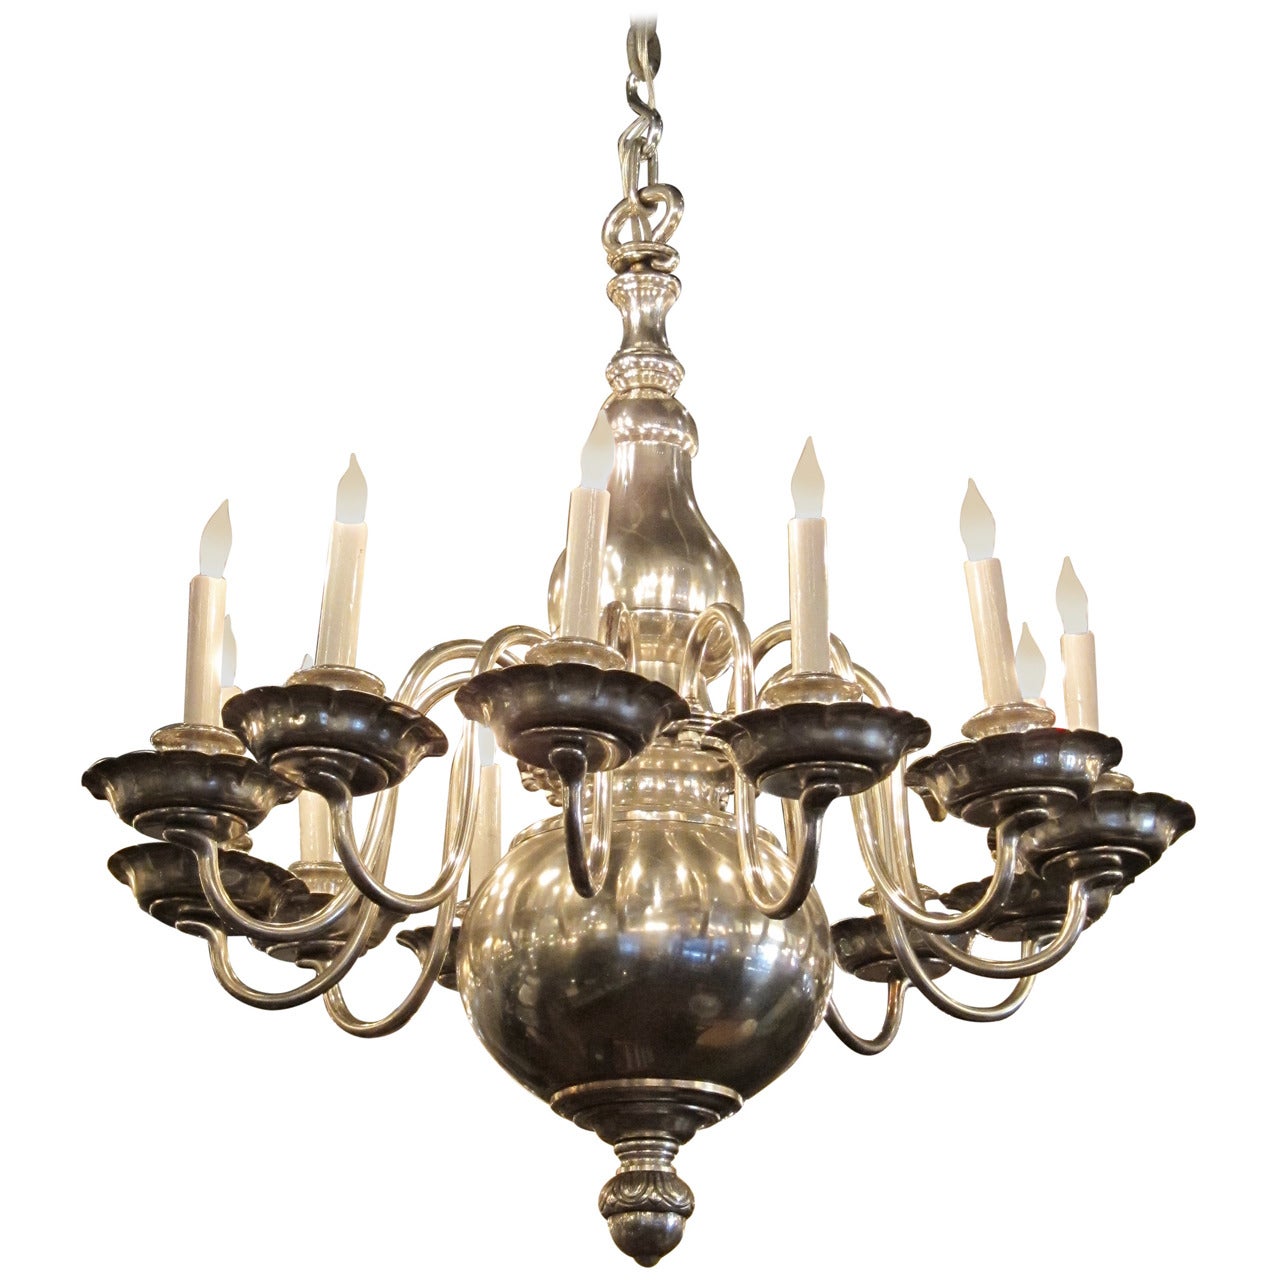 1900s Williamsburg Style Nickeled Bronze 12 Light Chandelier by E. F. Caldwell